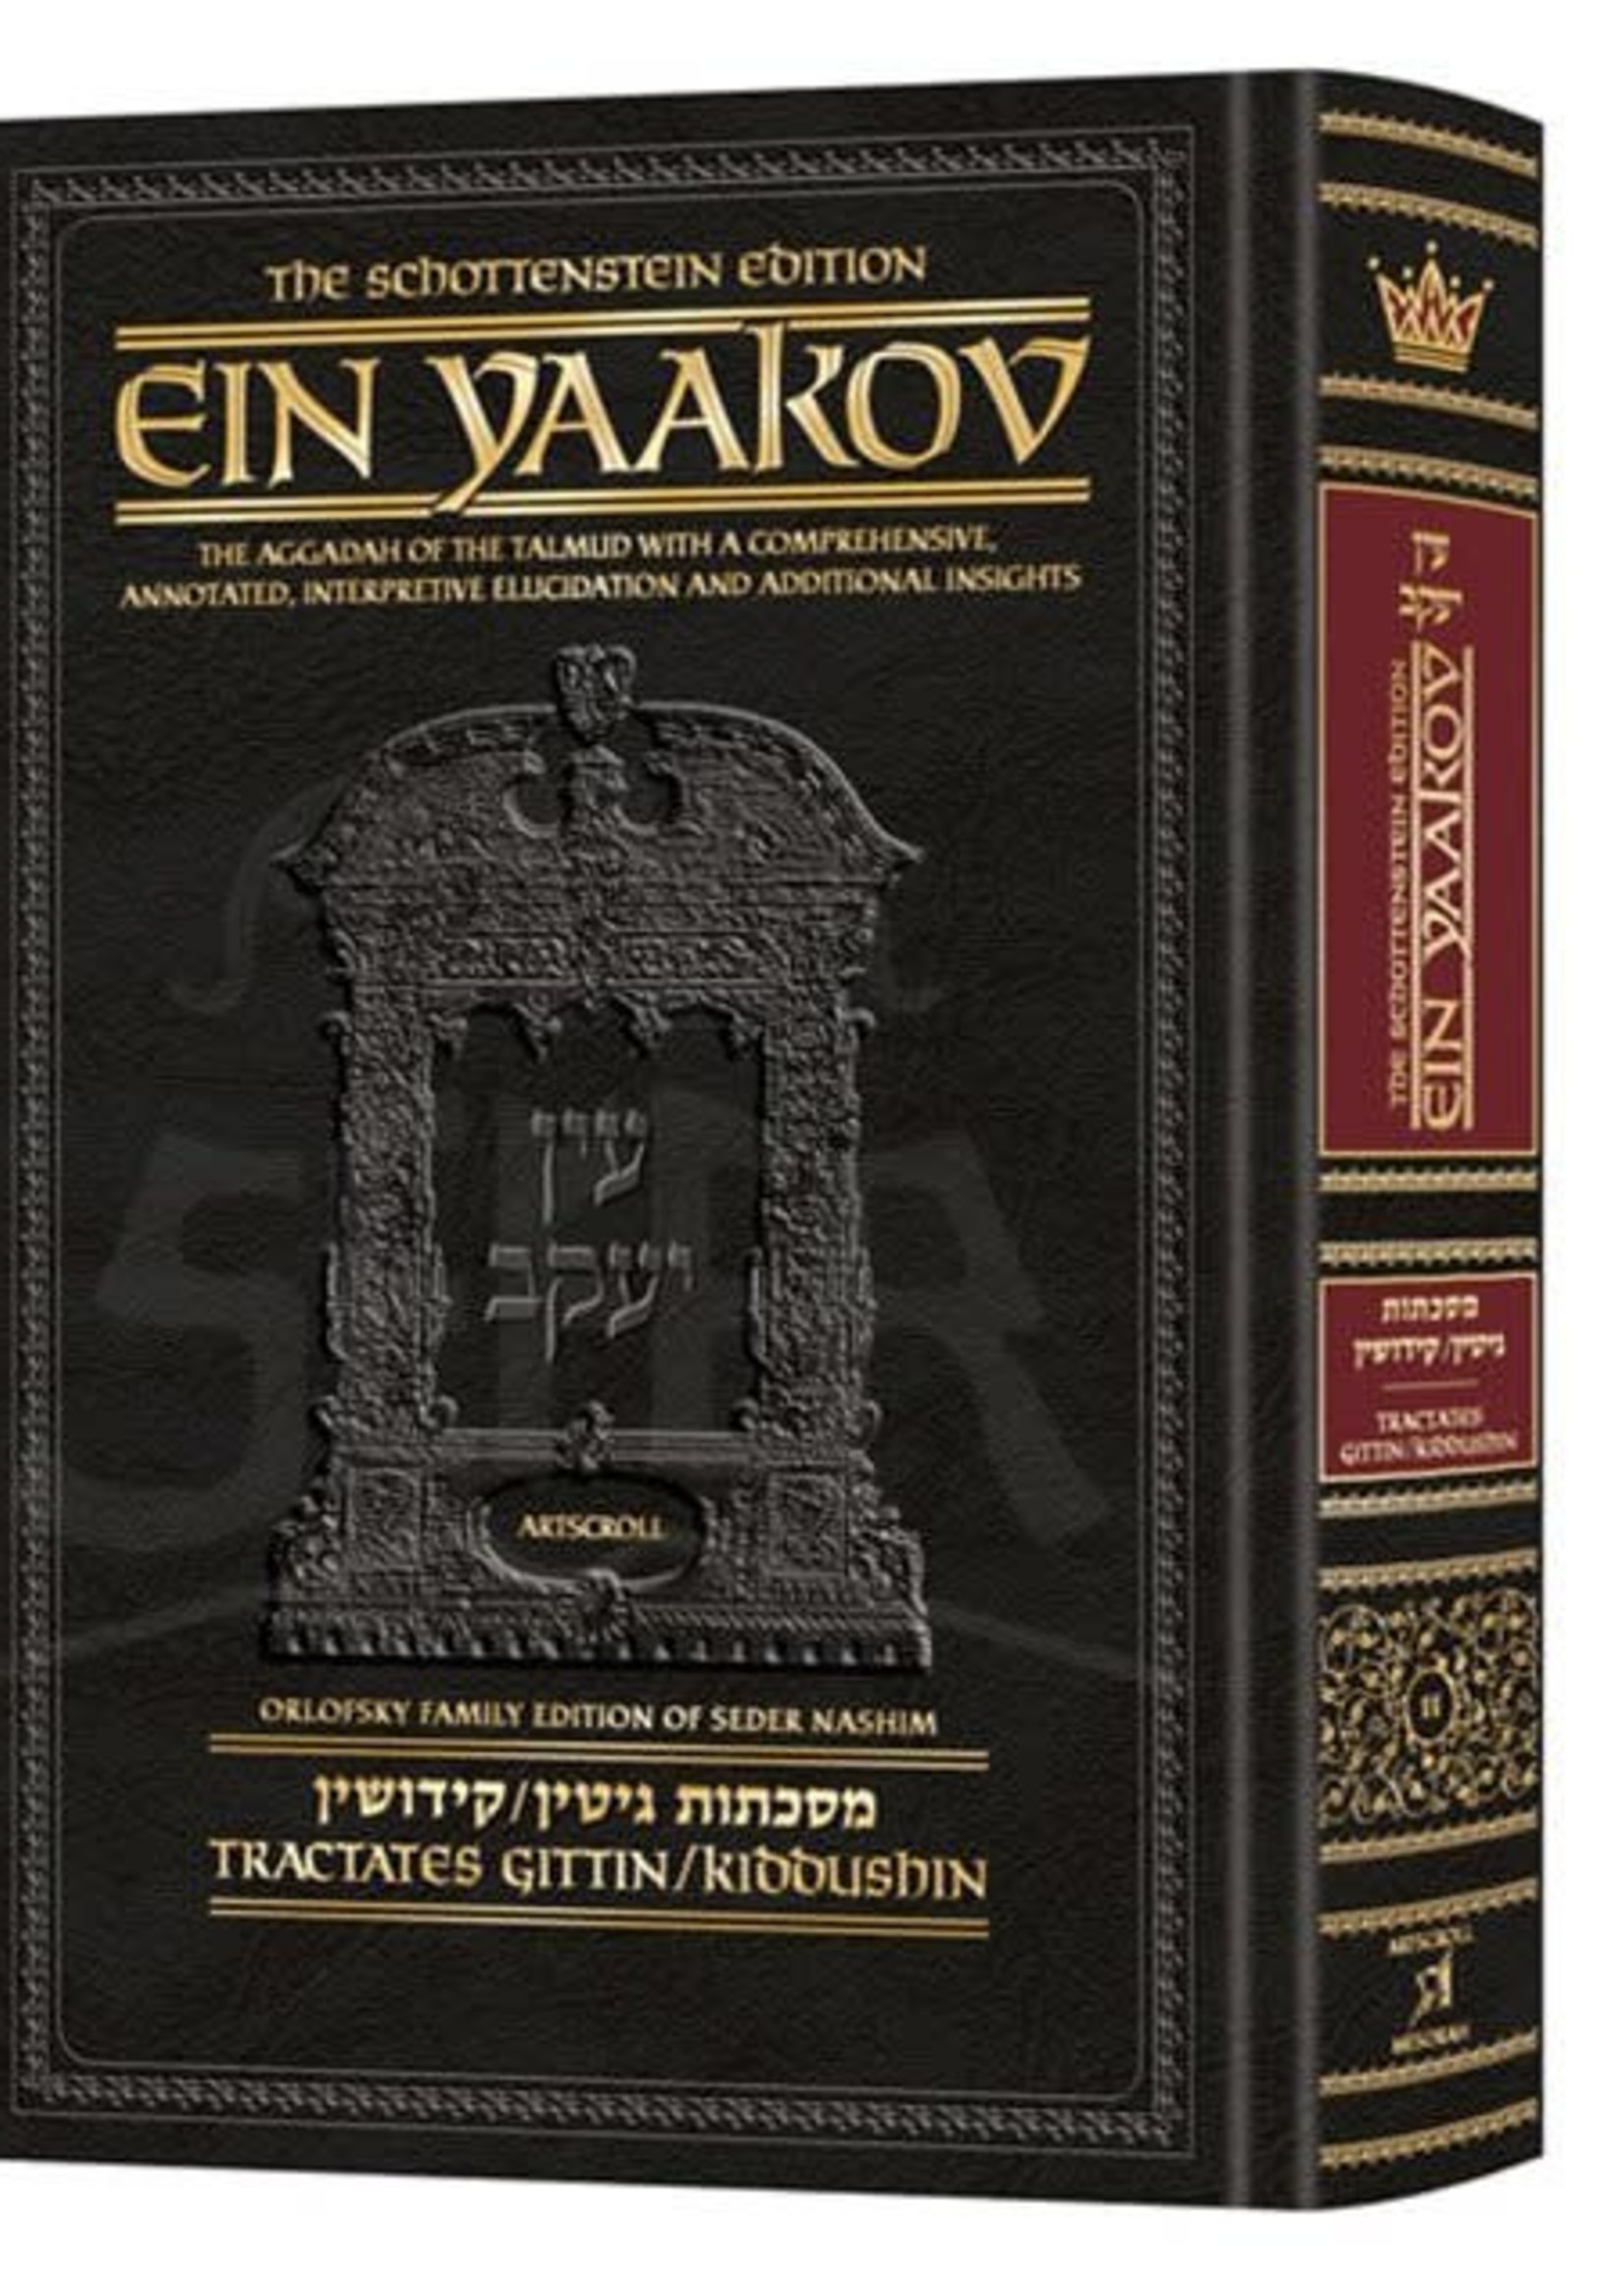 Schottenstein Edition Ein Yaakov: Gittin / Kiddushin - The Aggadah of the Talmud with a comprehensive, annotated interpretive elucidation and additional insights